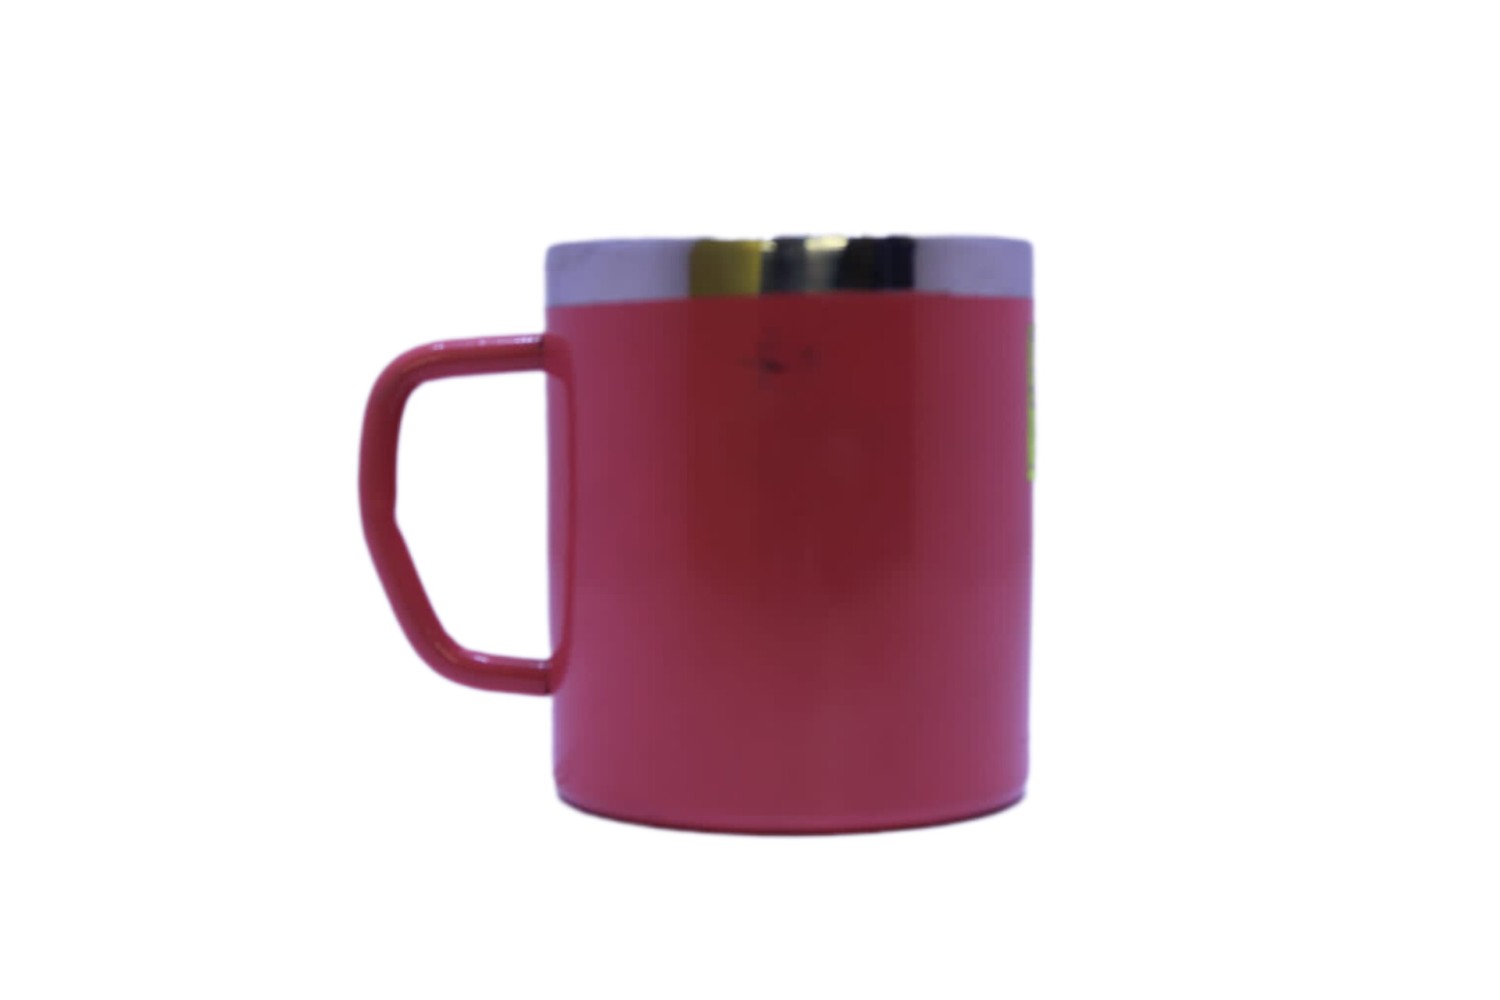 Stainless Steel Plastic Coated Double Layer Coffee and Tea Mug Silver Cups for Kitchen Home Gifts -Red